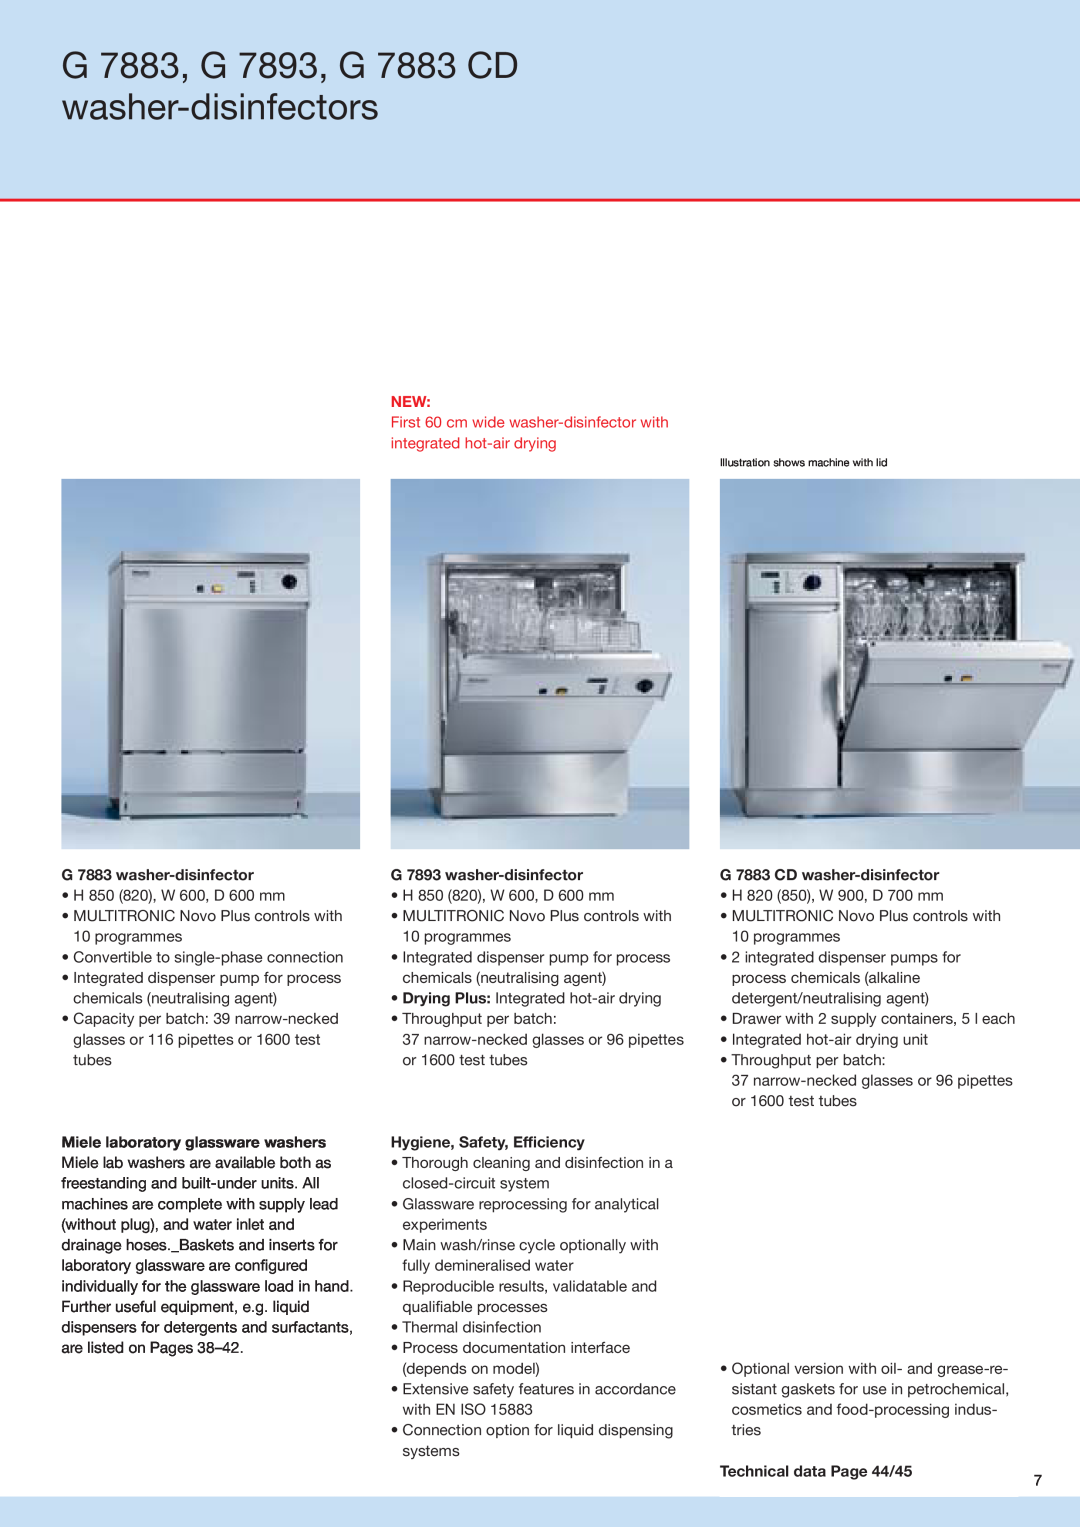 Miele G 7836 manual G 7883, G 7893, G 7883 CD washer-disinfectors, G 7883 washer-disinfector, G 7893 washer-disinfector 